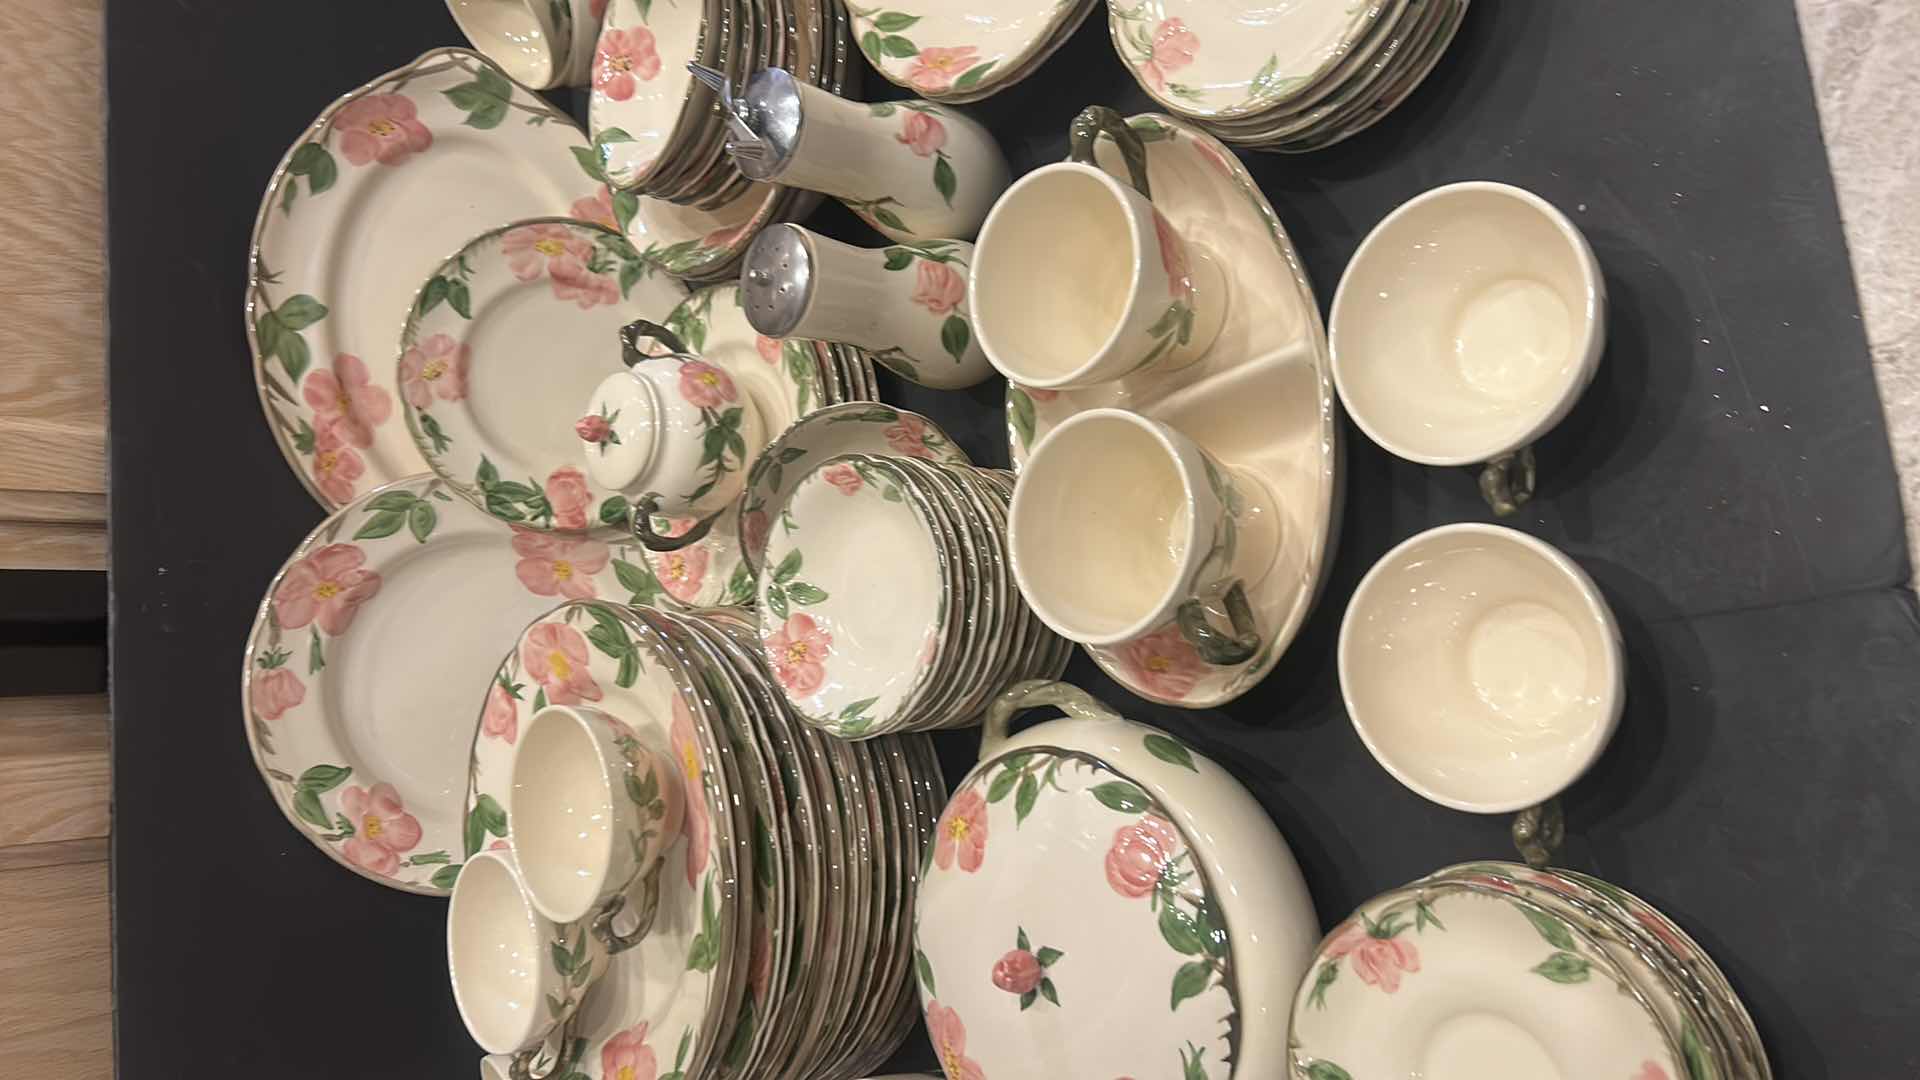 Photo 5 of 85 PIECE FRANCISCAN DESERT ROSE COLLECTION - BEAUTIFUL IVORY AND PINK FLORAL DINNERWARE SET in